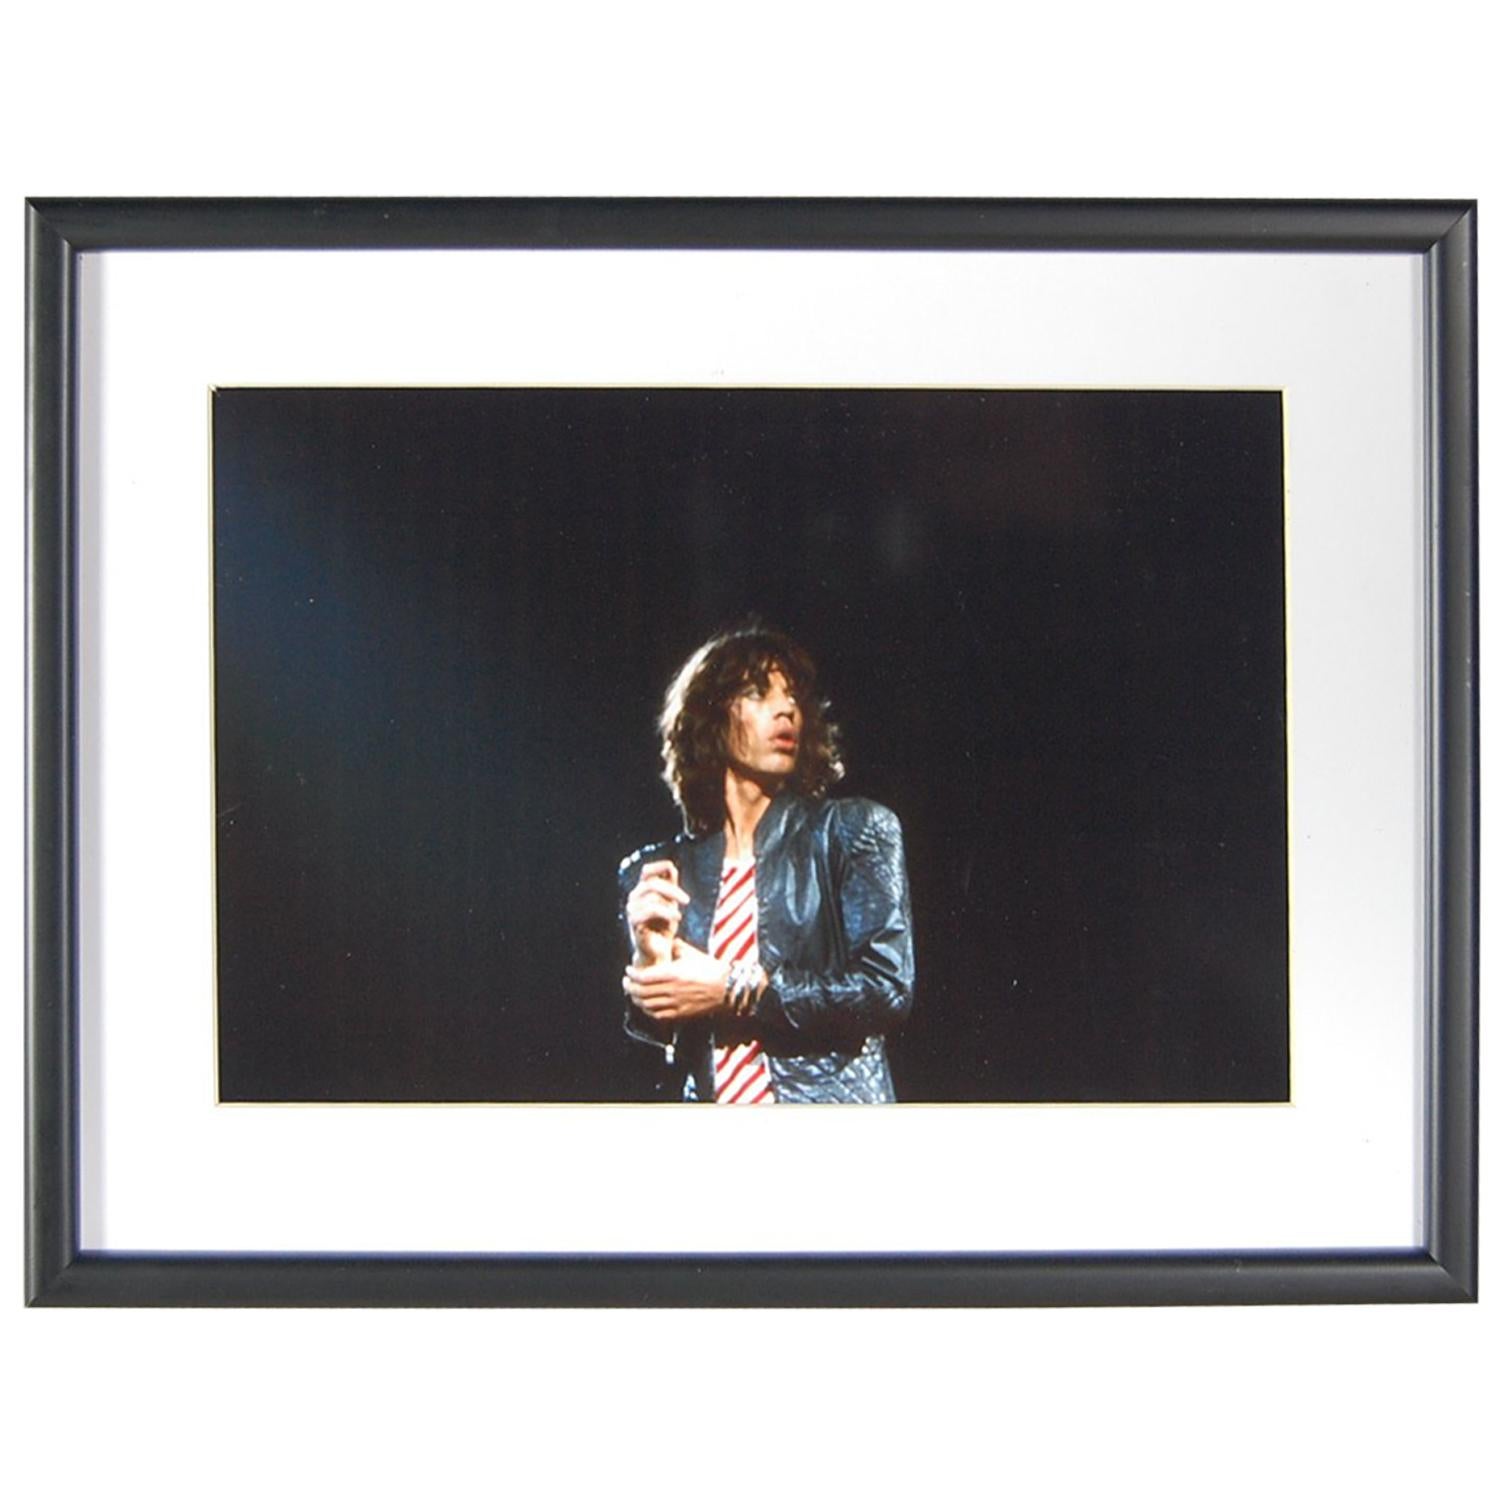 Mick Jagger Photograph "On Stage", London